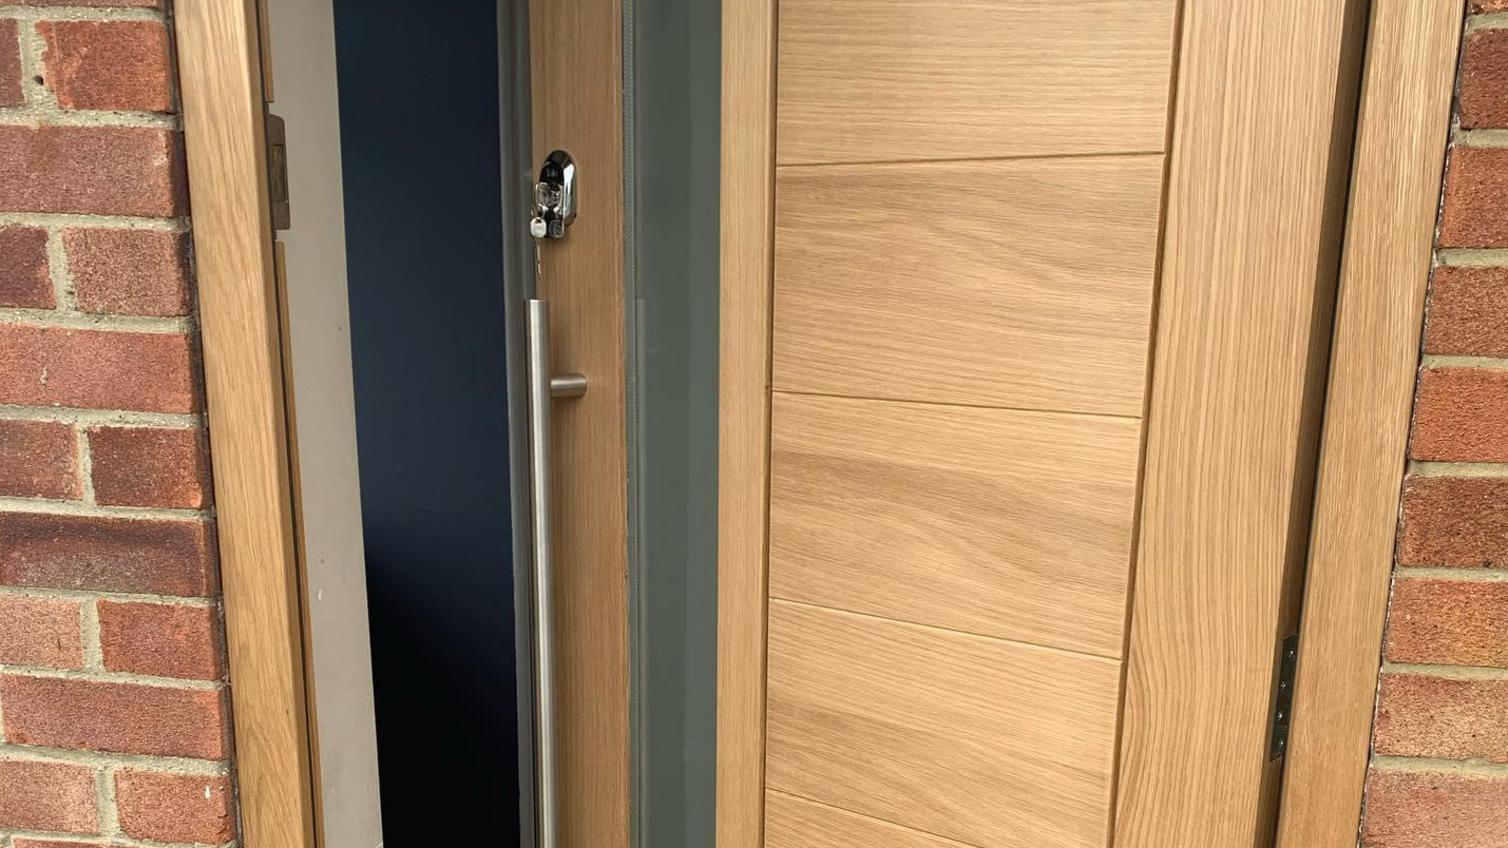 Oak panelled door with long frosted glass panel offering a linear look, with silver bar handle, lock, and a silver letterbox.